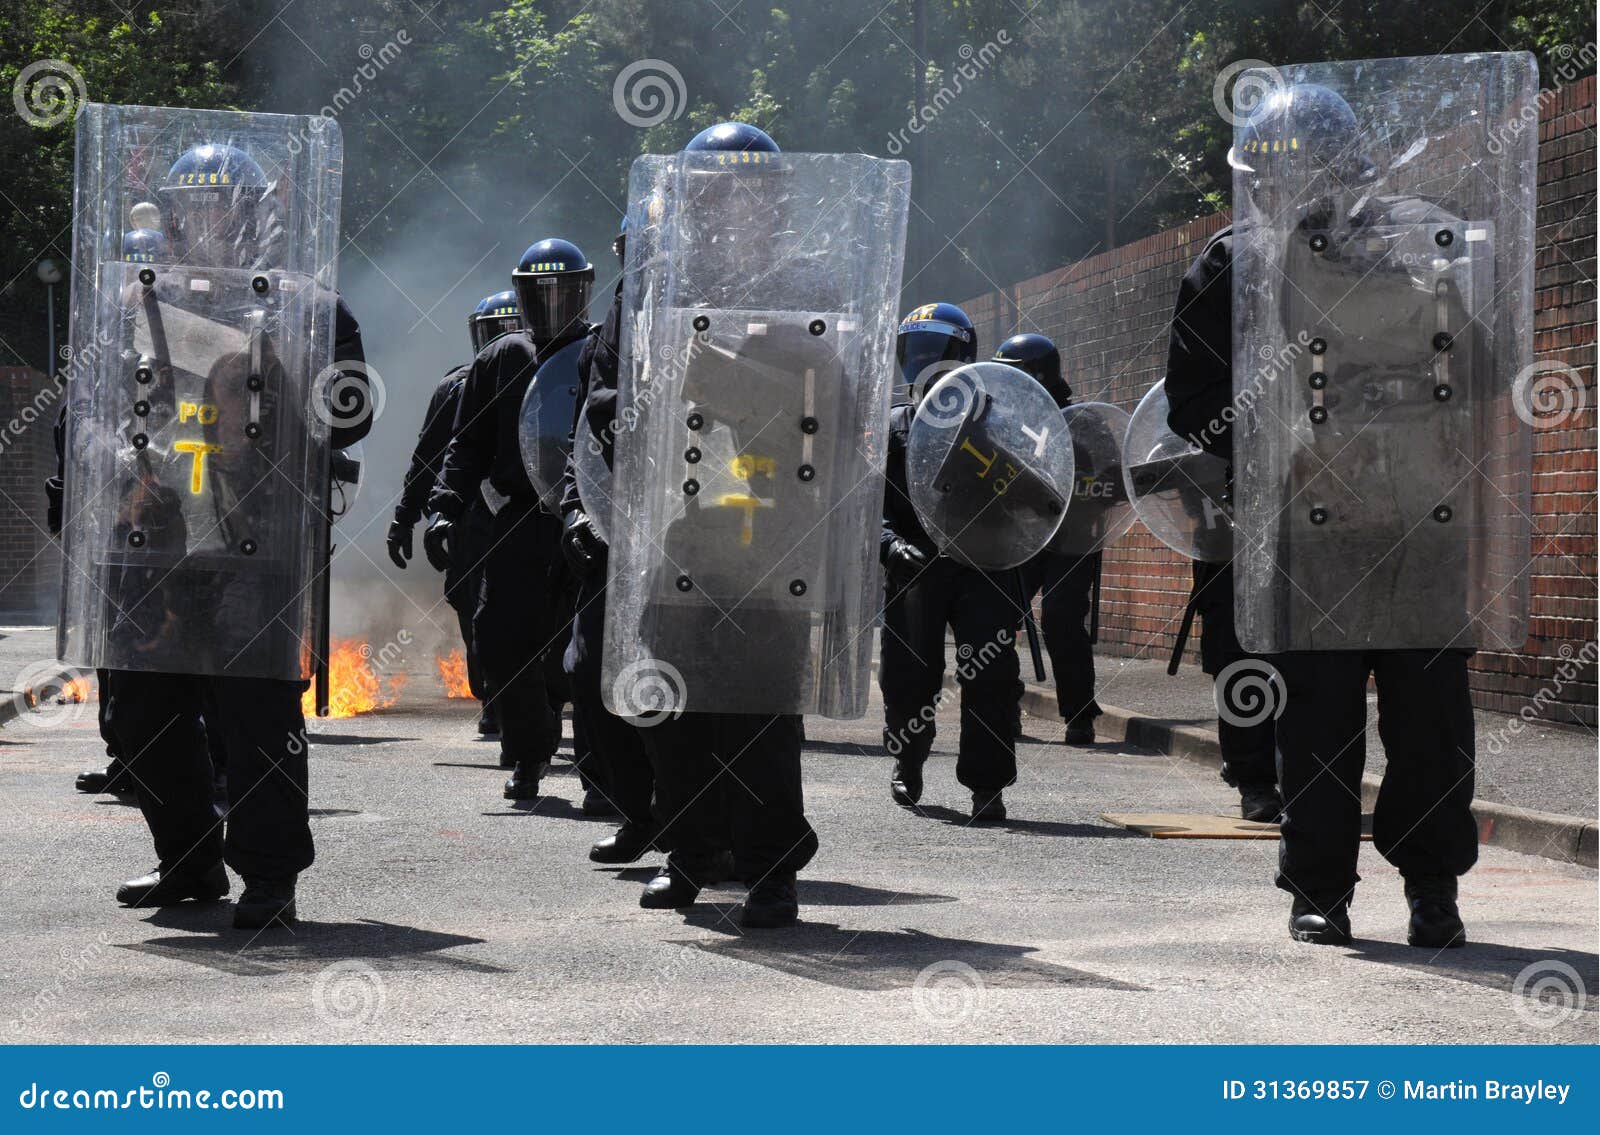 Body Armor - Riot Shields for Riot Police, Corrections  and Cell Extraction